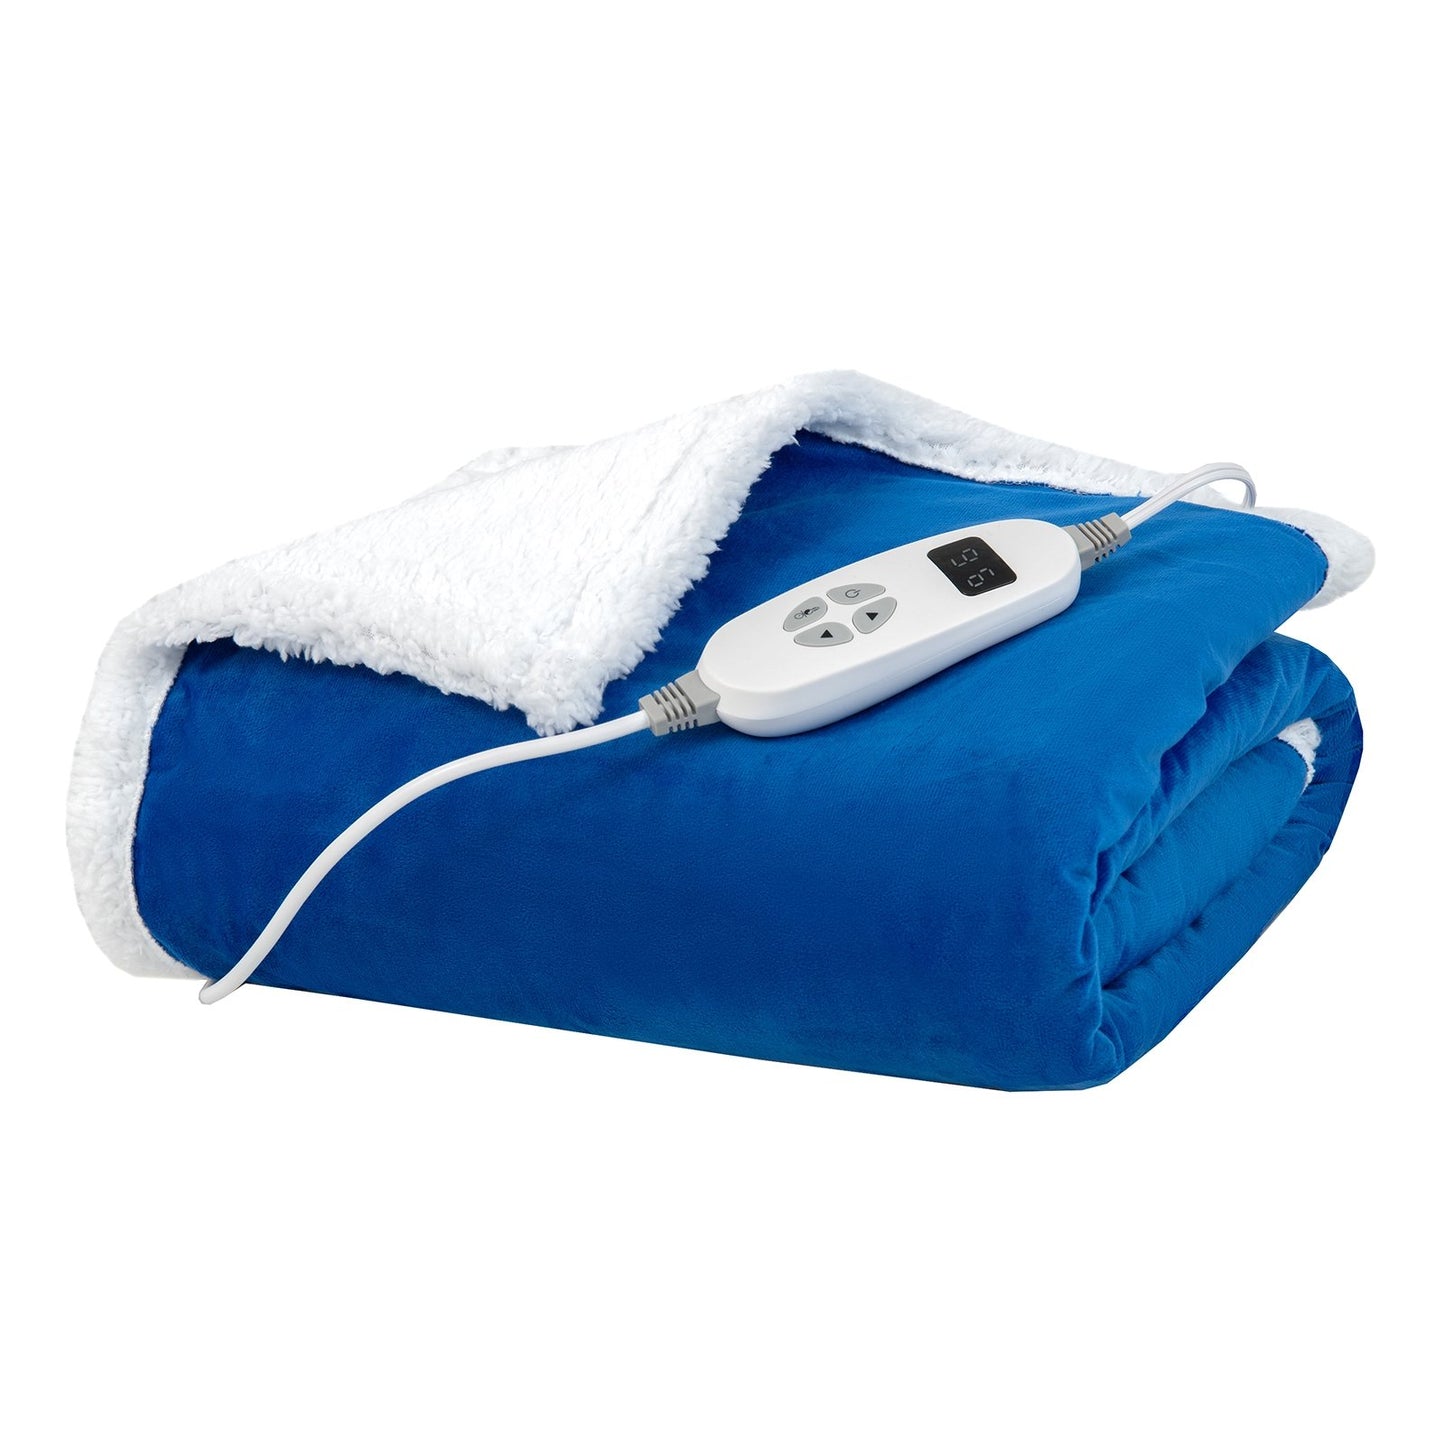 Heated Electric Blanket Throw with 10 Heat Levels, Blue